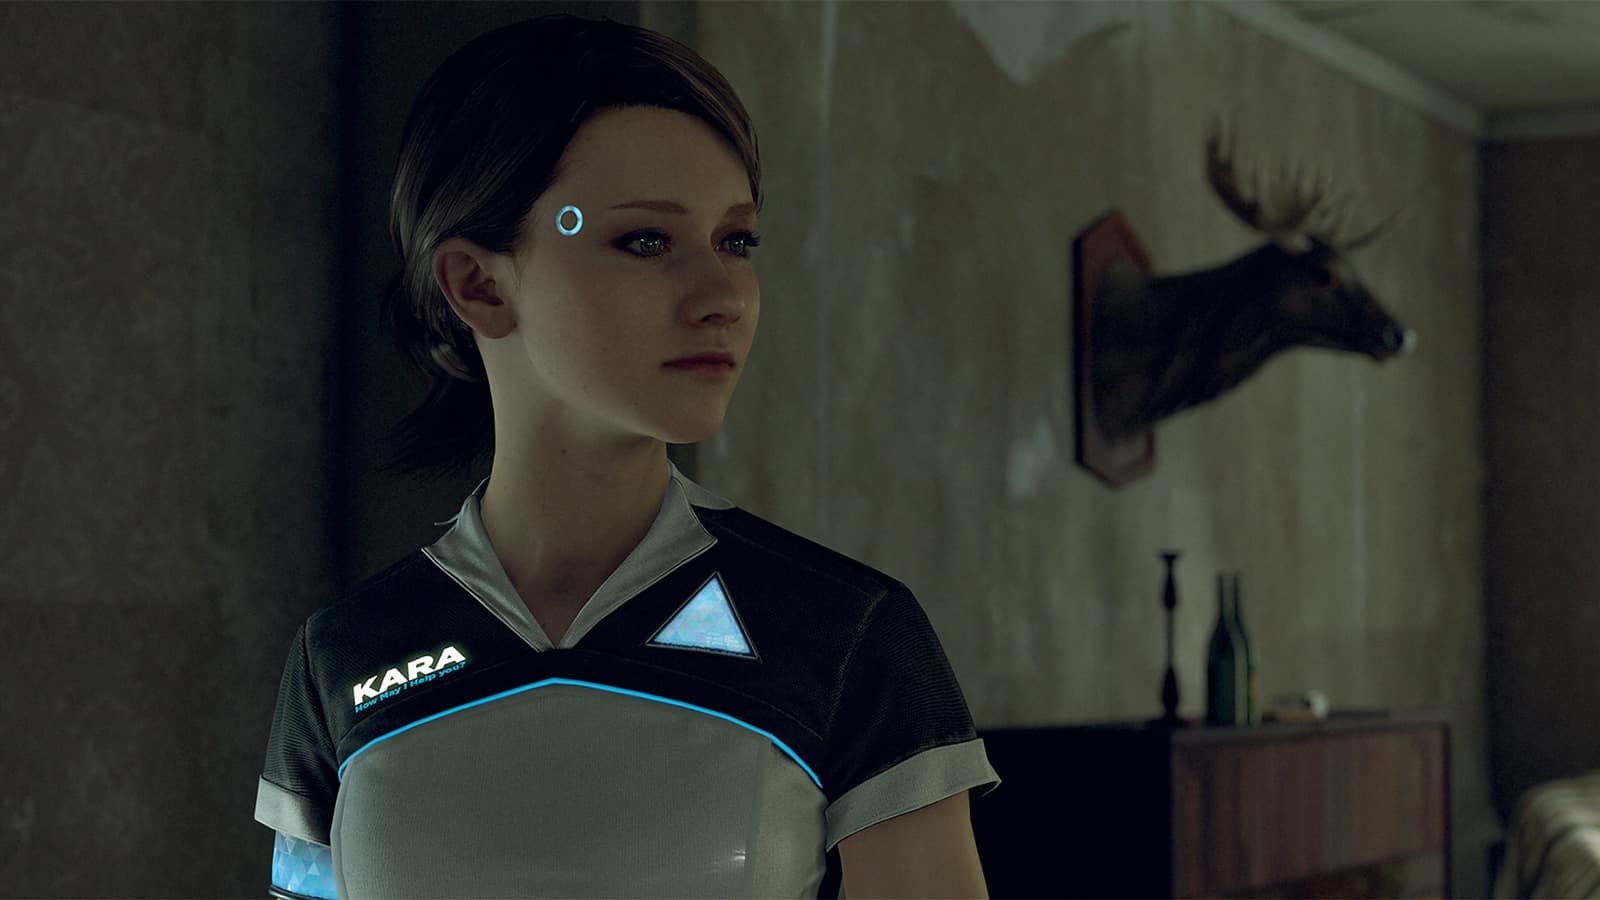 Kara portrayed by Valorie Curry in Detroit Become Human's cast